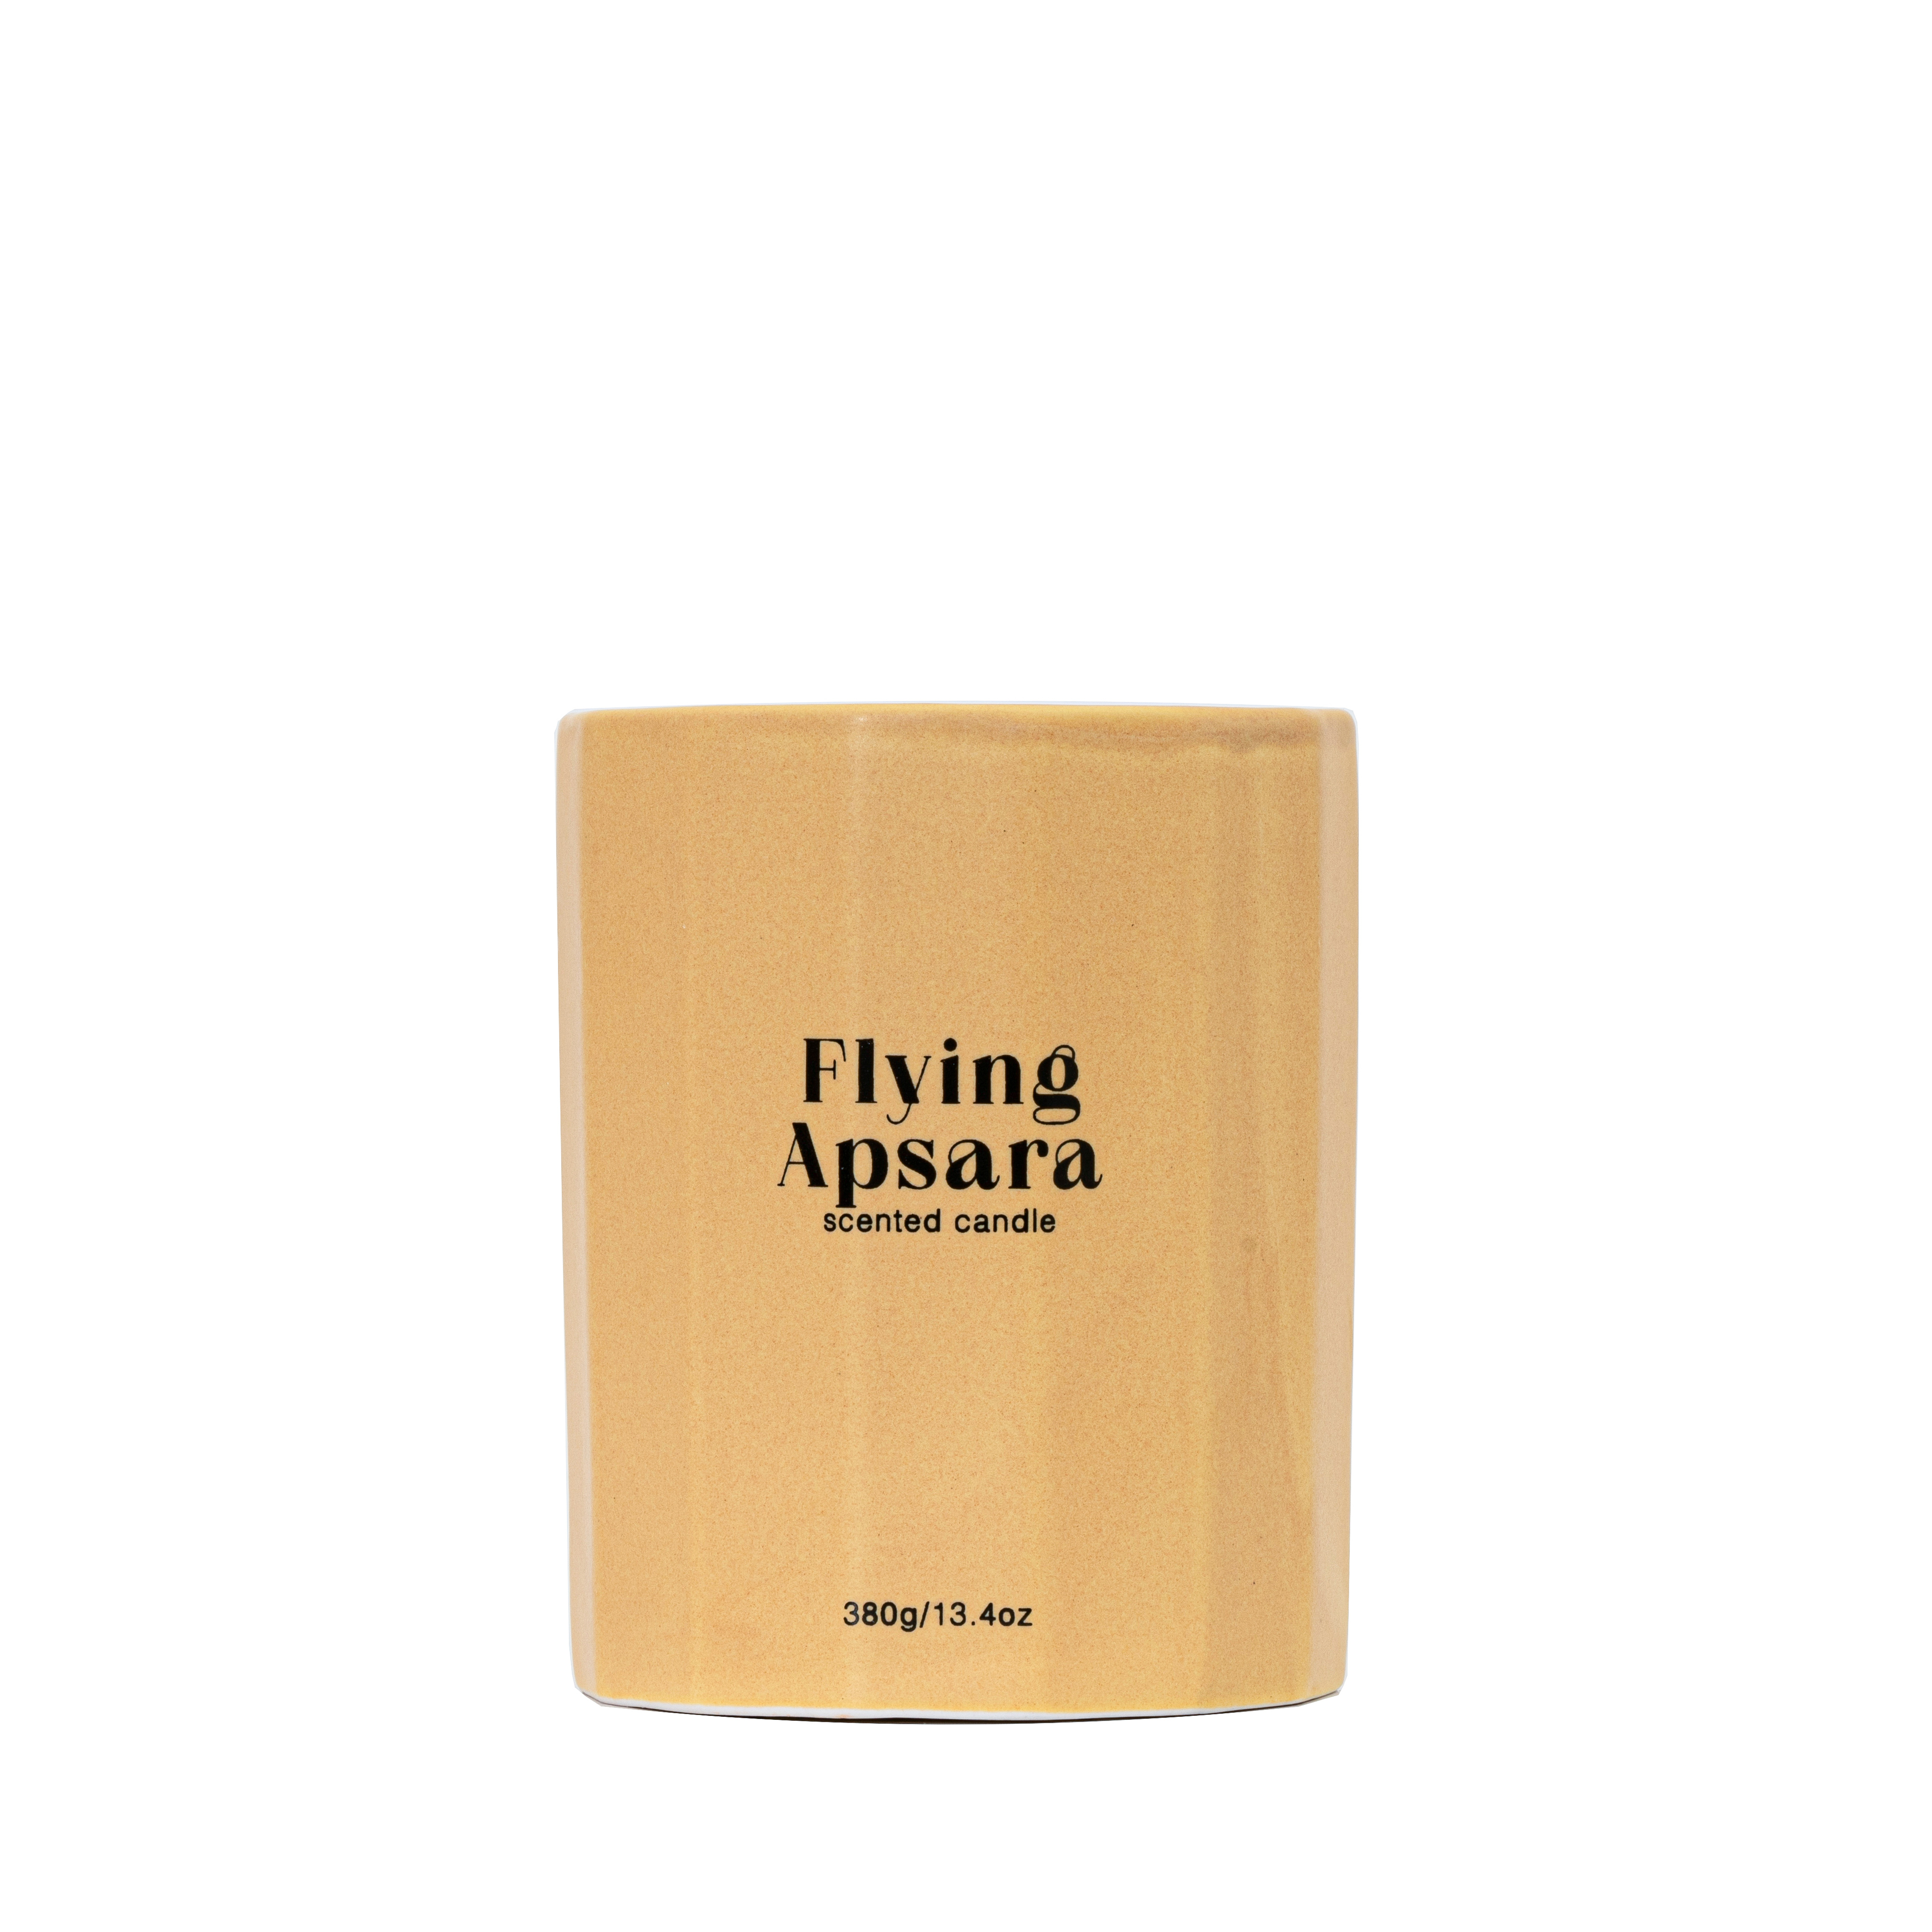 WOODWICK IS ON Collection Scented Candle Flying Apsara Yellow Ceramic Jar 380g